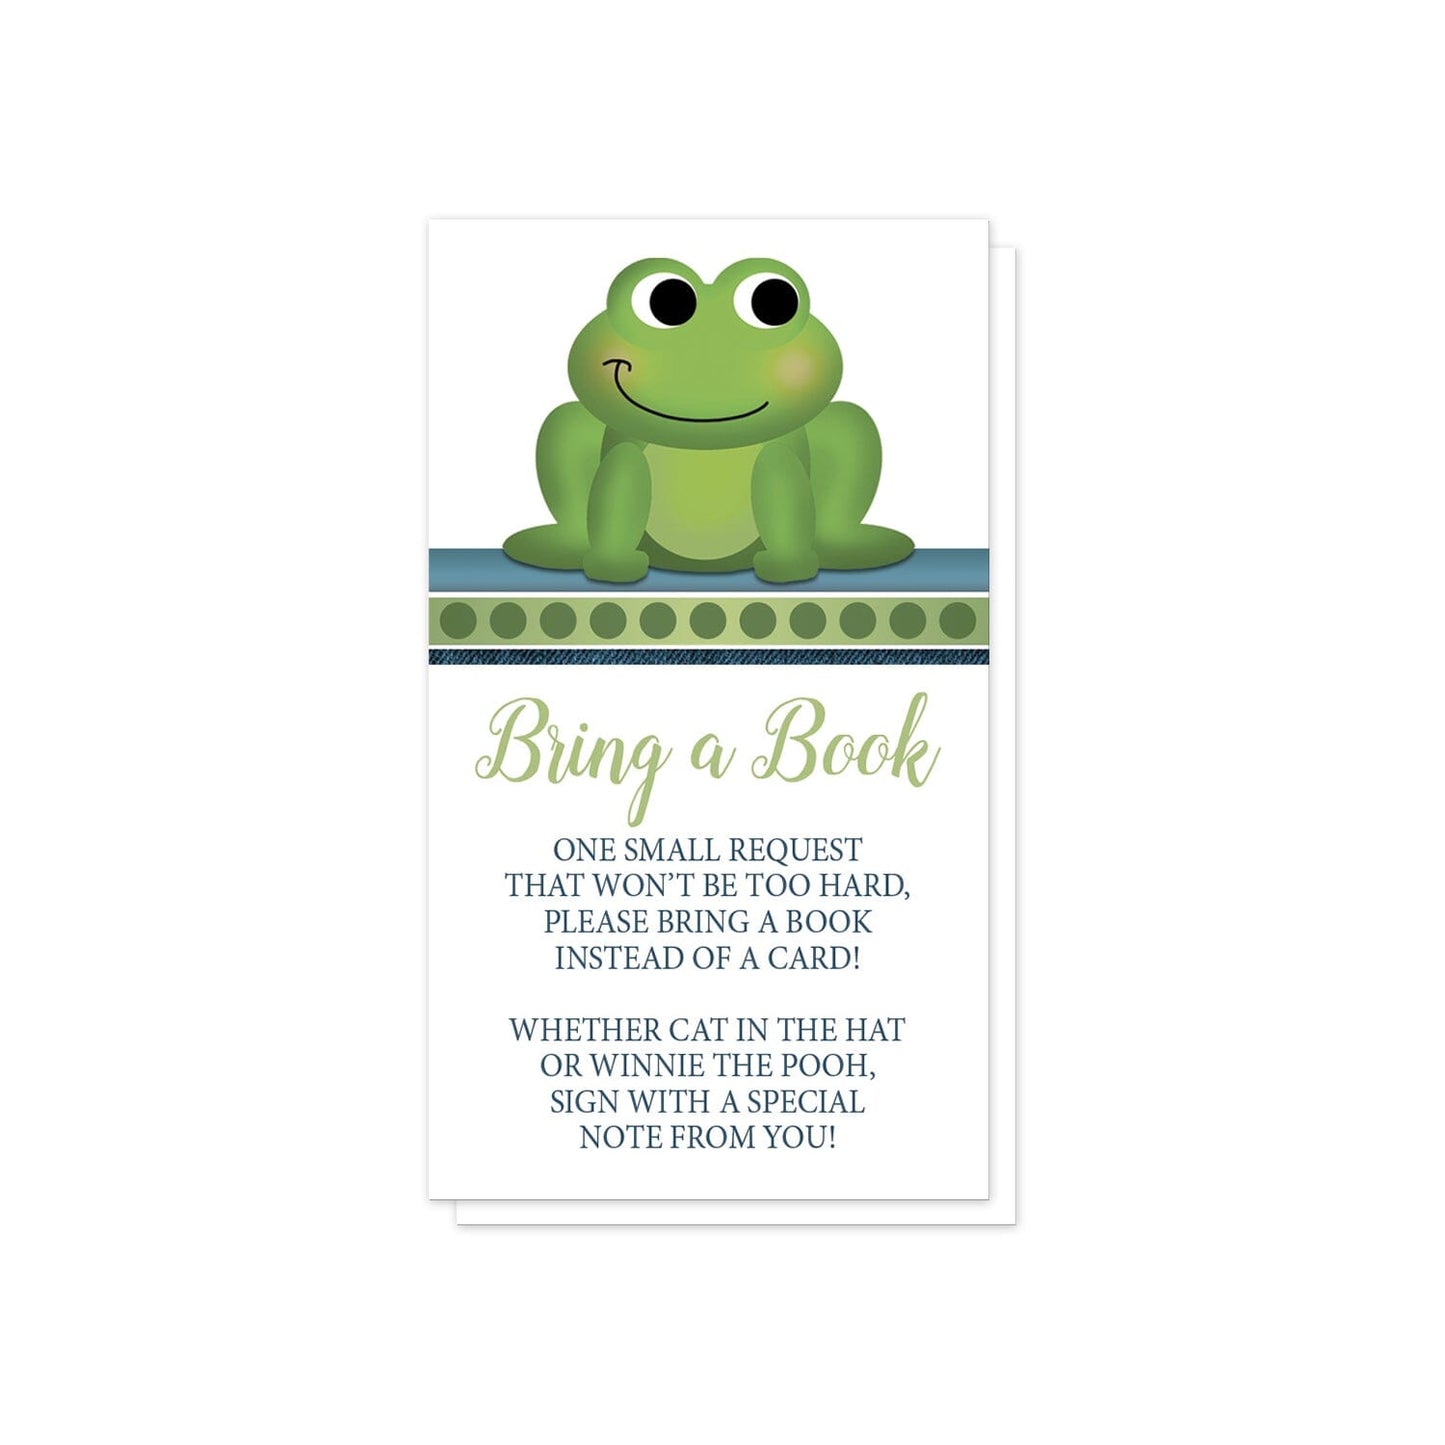 Cute Frog Green Rustic Blue Bring a Book Cards at Artistically Invited. Cute frog green rustic blue bring a book cards with a happy and adorable green frog on a blue, green polka dot, and thin blue denim stripe at the top of the cards. Your book request details are printed in green and blue on white below the cute frog. 